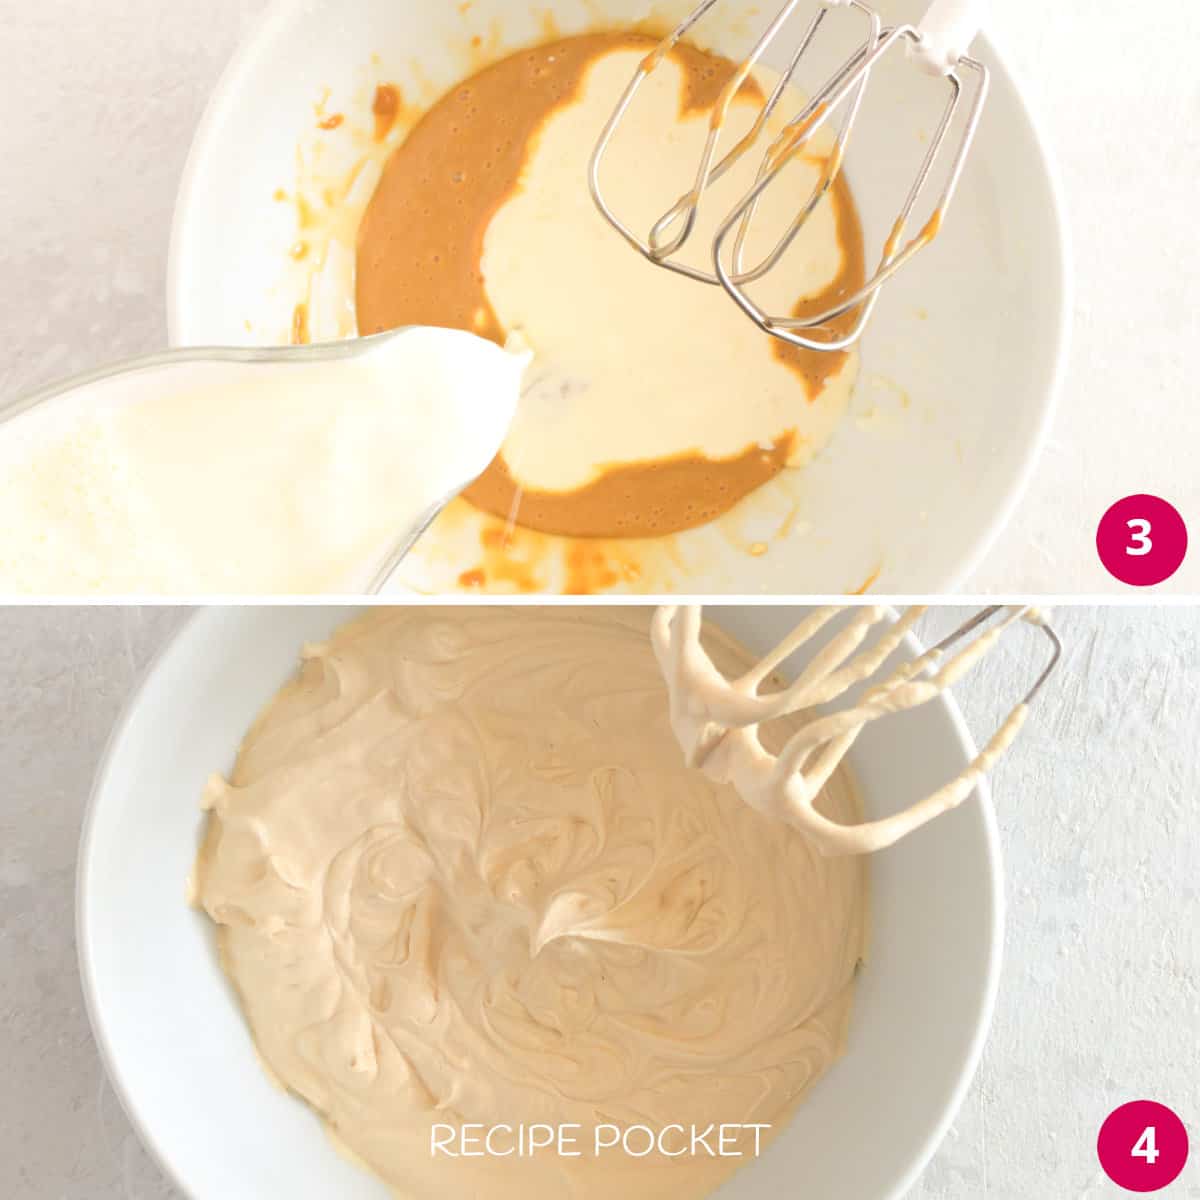 Image collage showing whipped dulce de leche and cream.